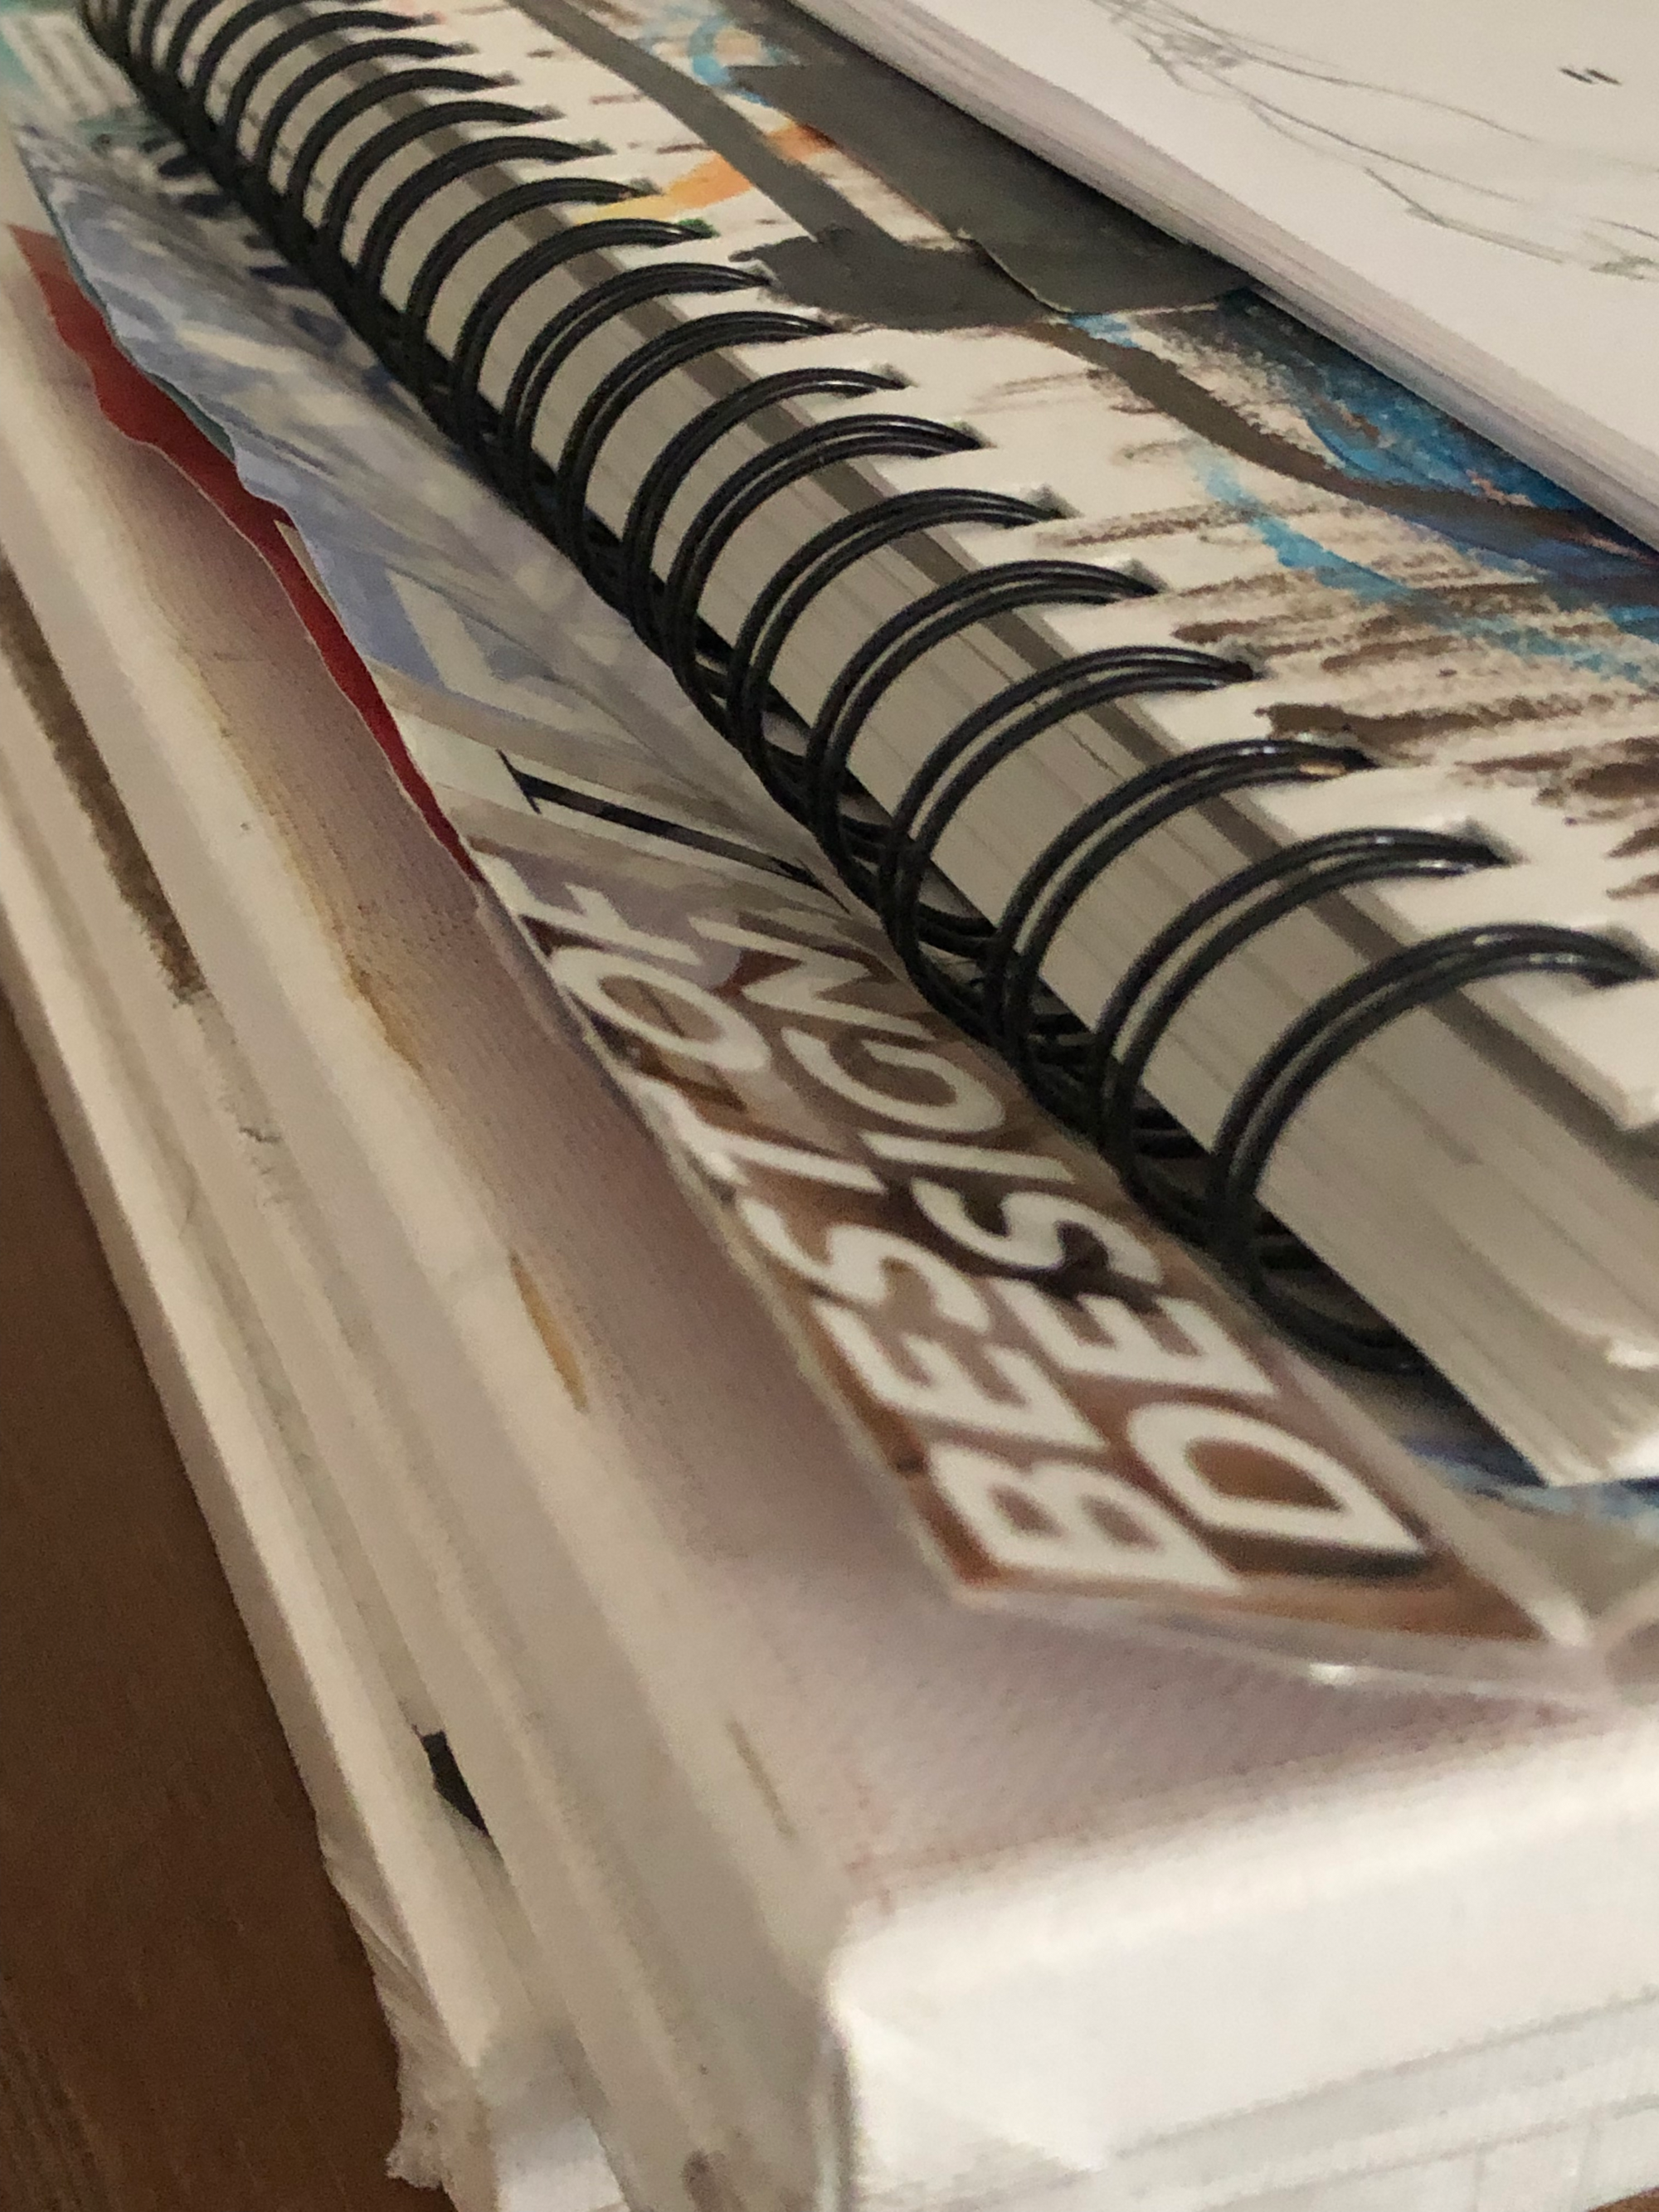 close-up photo of a stack of canvasses, one with a cut-out with the words "BEST OF DESIGN" taped to it, lifting off the canvas, a ringed notebook with an obscured painting and stack of paper on top. taken at the robledo art, strike! headquarters, february 2023.